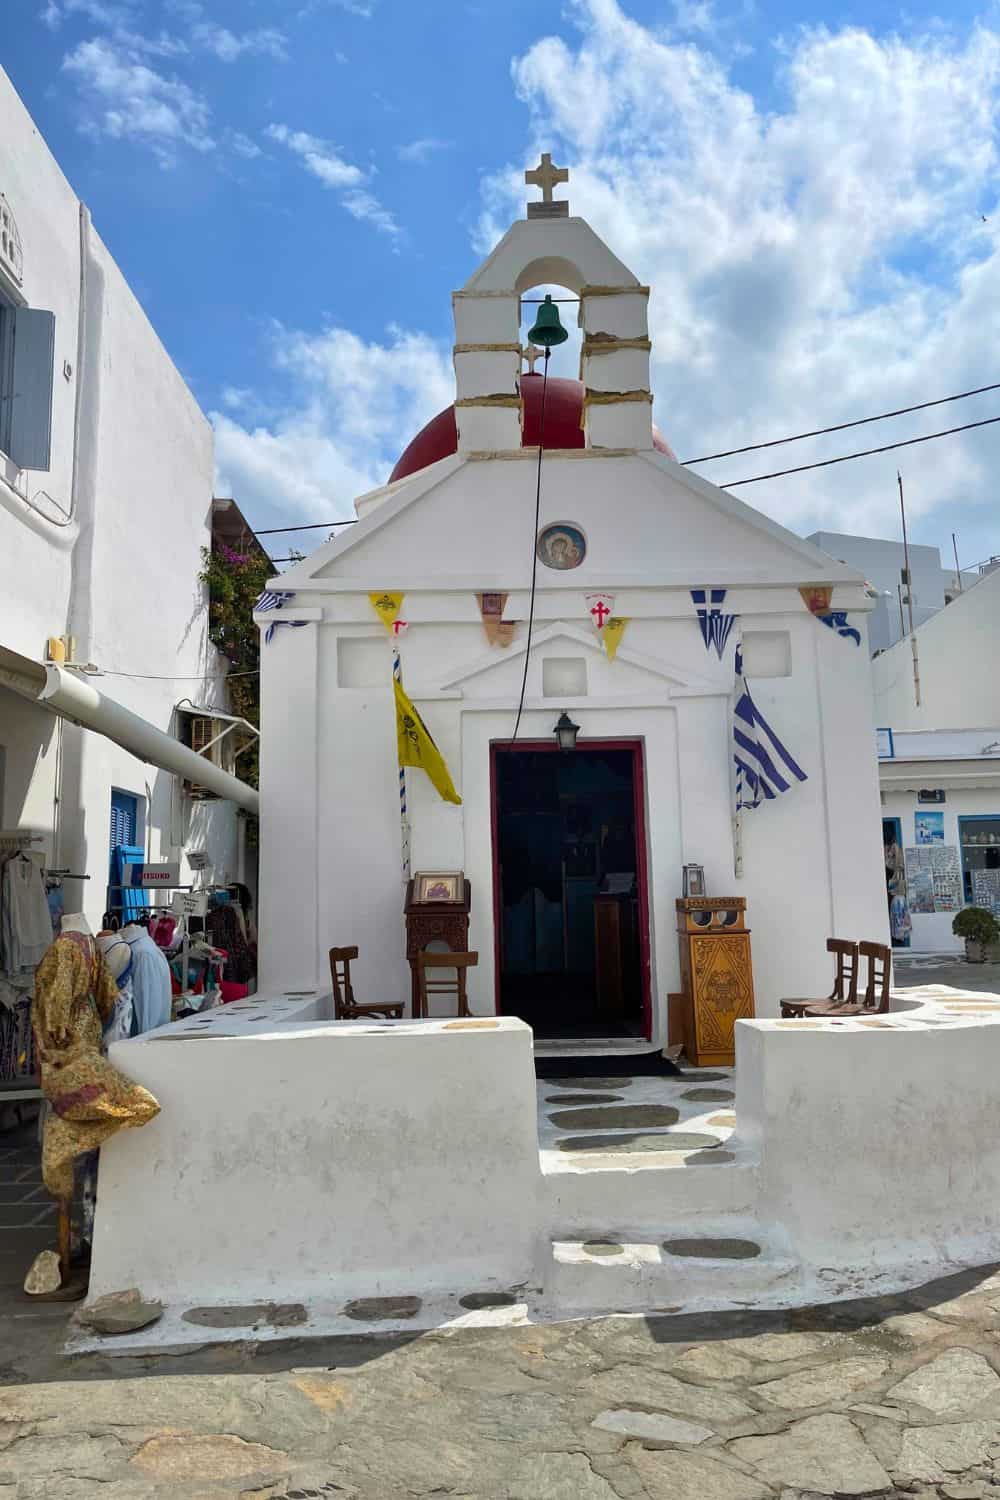 A small, charming church with a red dome and a white cross stands in the heart of Mykonos town. The façade is decorated with religious icons and Greek flags, while the steps leading up to the entrance are lined with chairs, showcasing the traditional Greek Orthodox architecture and community spirit of the island